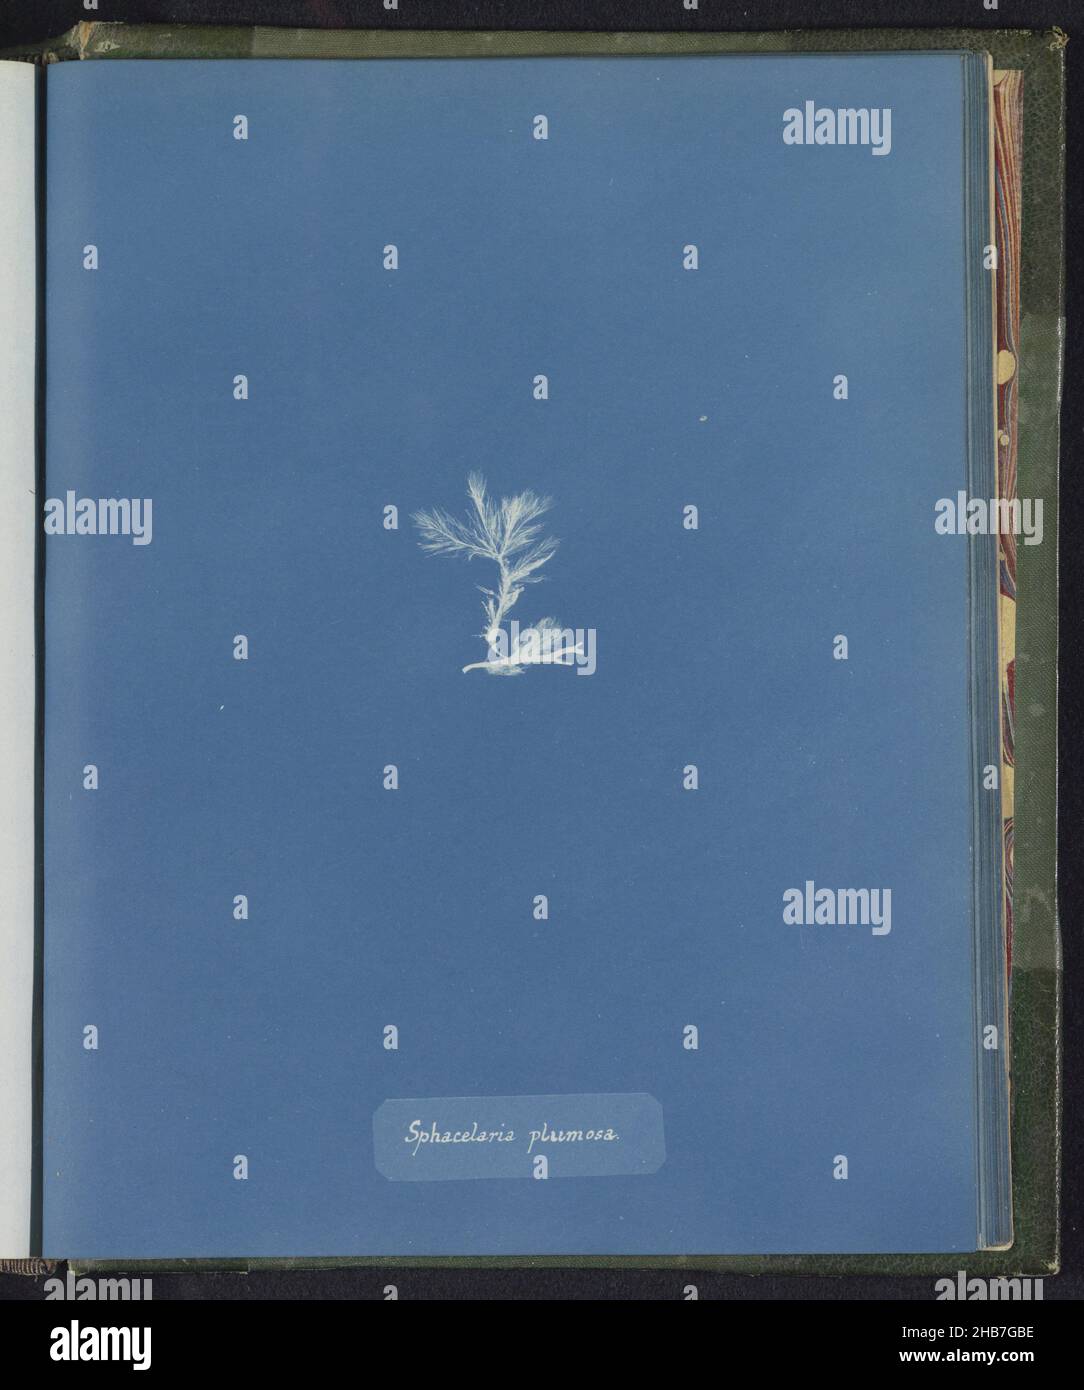 Sphacelaria plumosa, Anna Atkins, United Kingdom, c. 1843 - c. 1853, photographic support, cyanotype, height 250 mm × width 200 mm Stock Photo